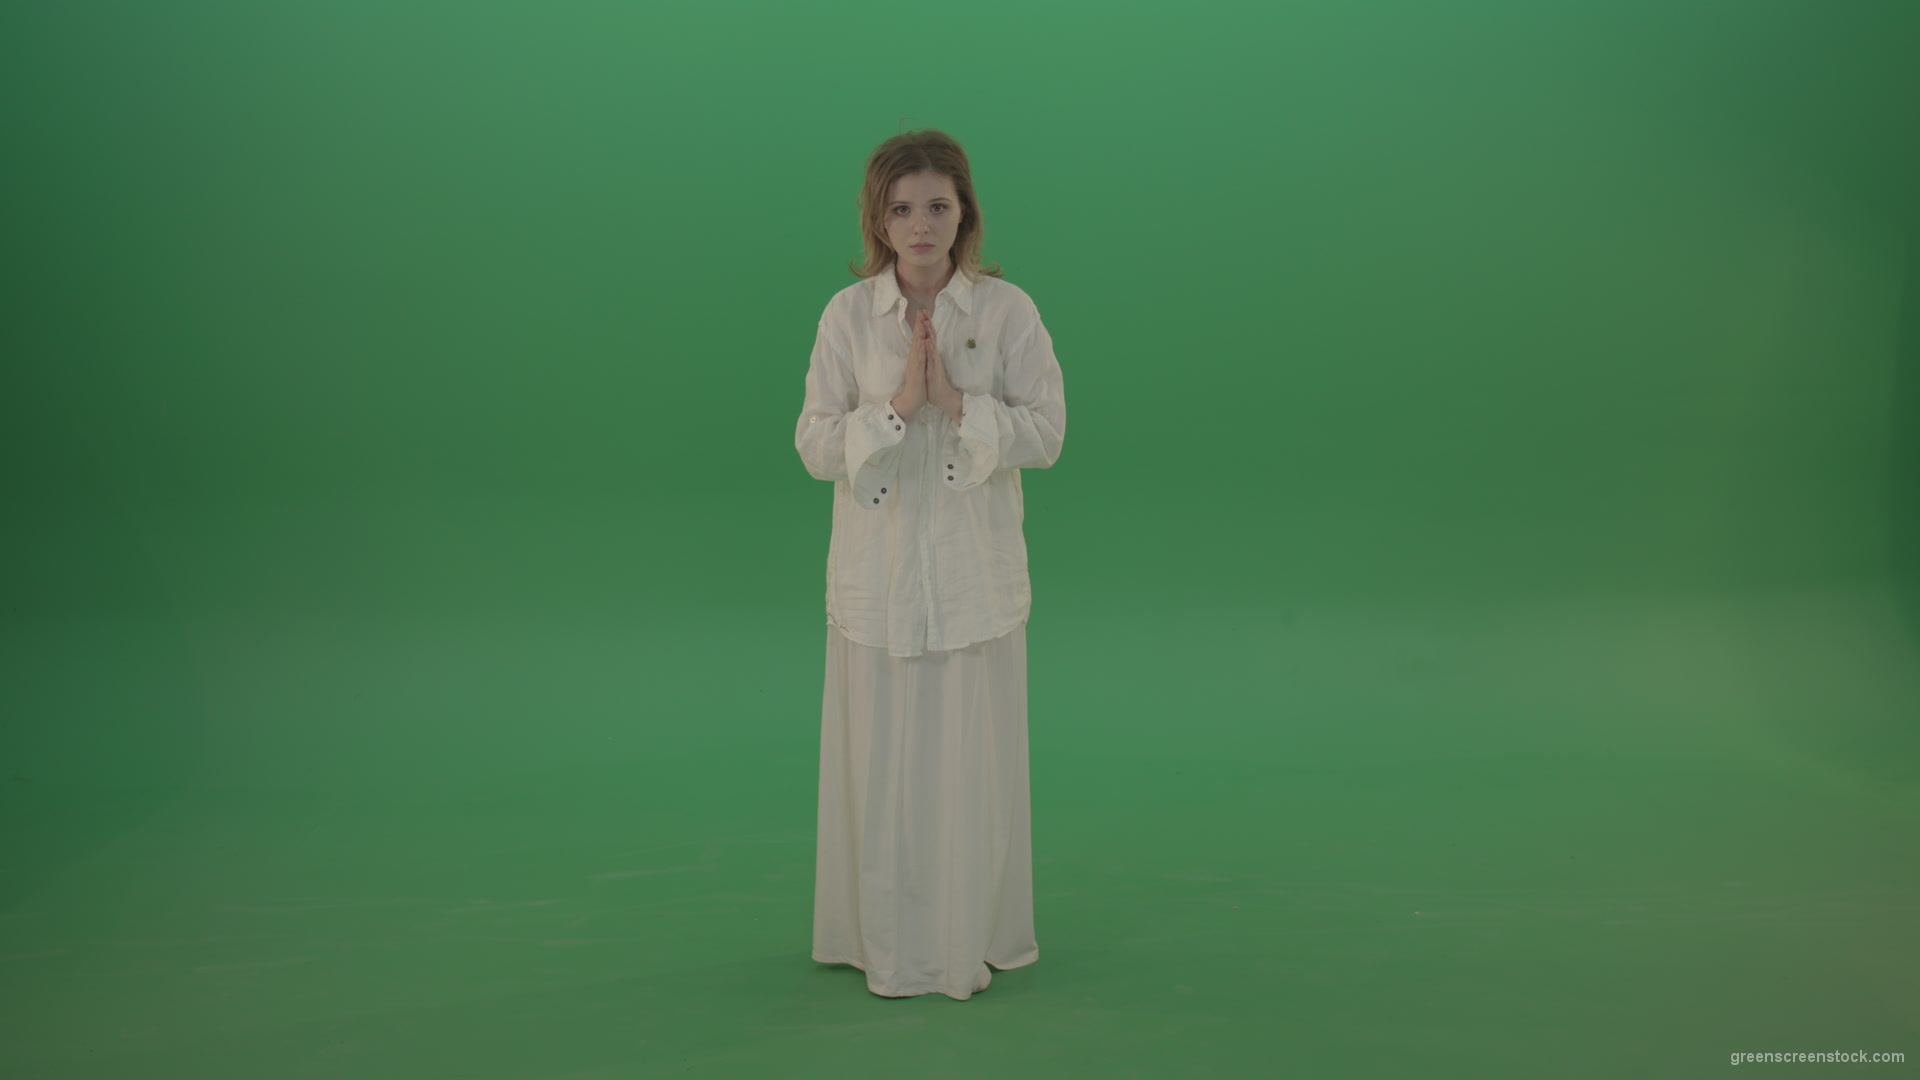 Girl-wearing-a-white-suit-pray-to-god-isolated-on-green-background_005 Green Screen Stock